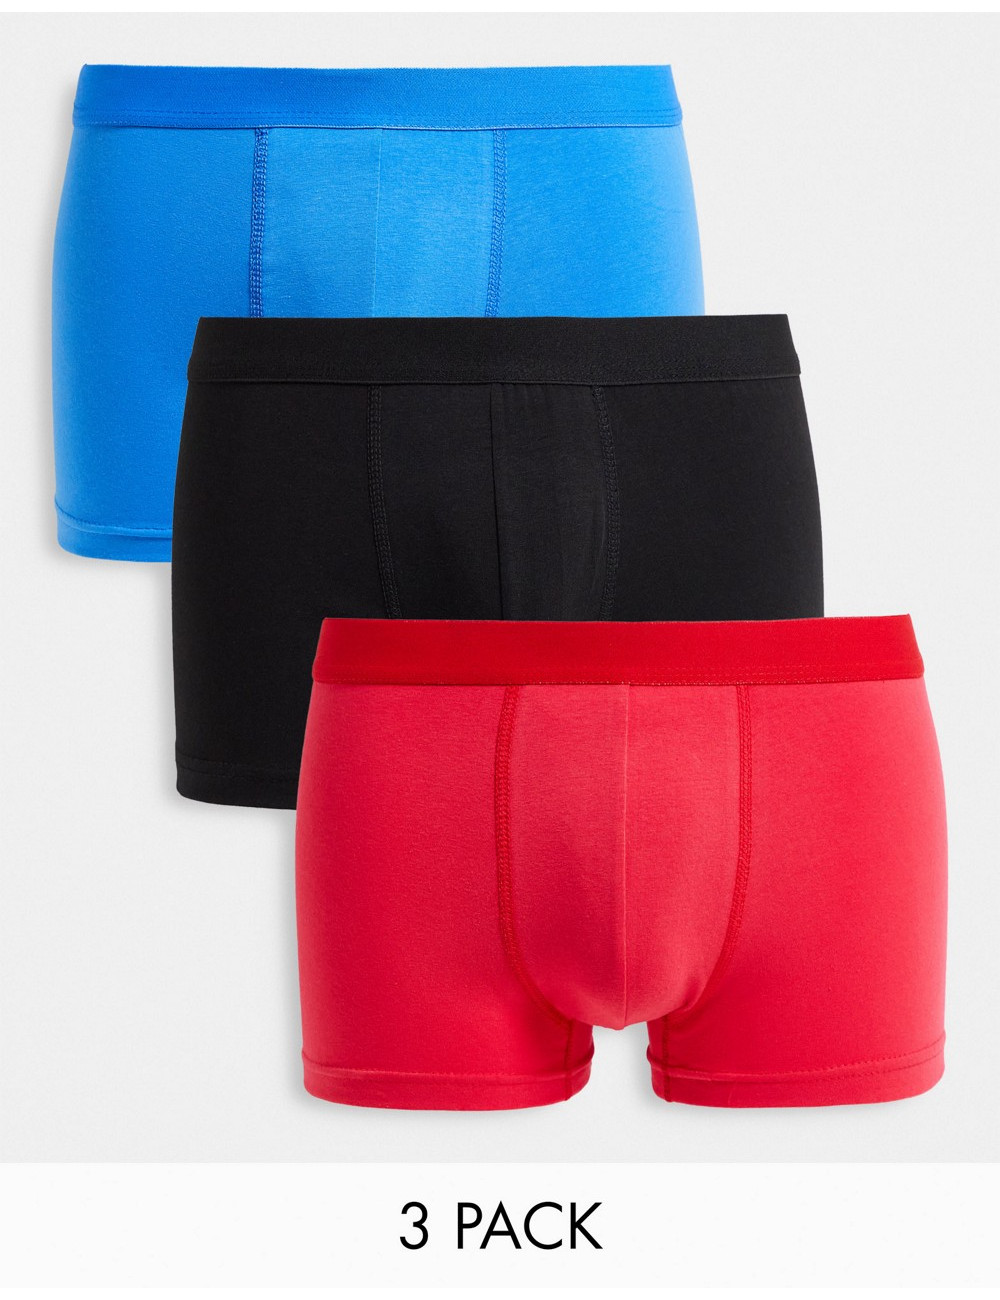 New Look 3 pack boxers in...